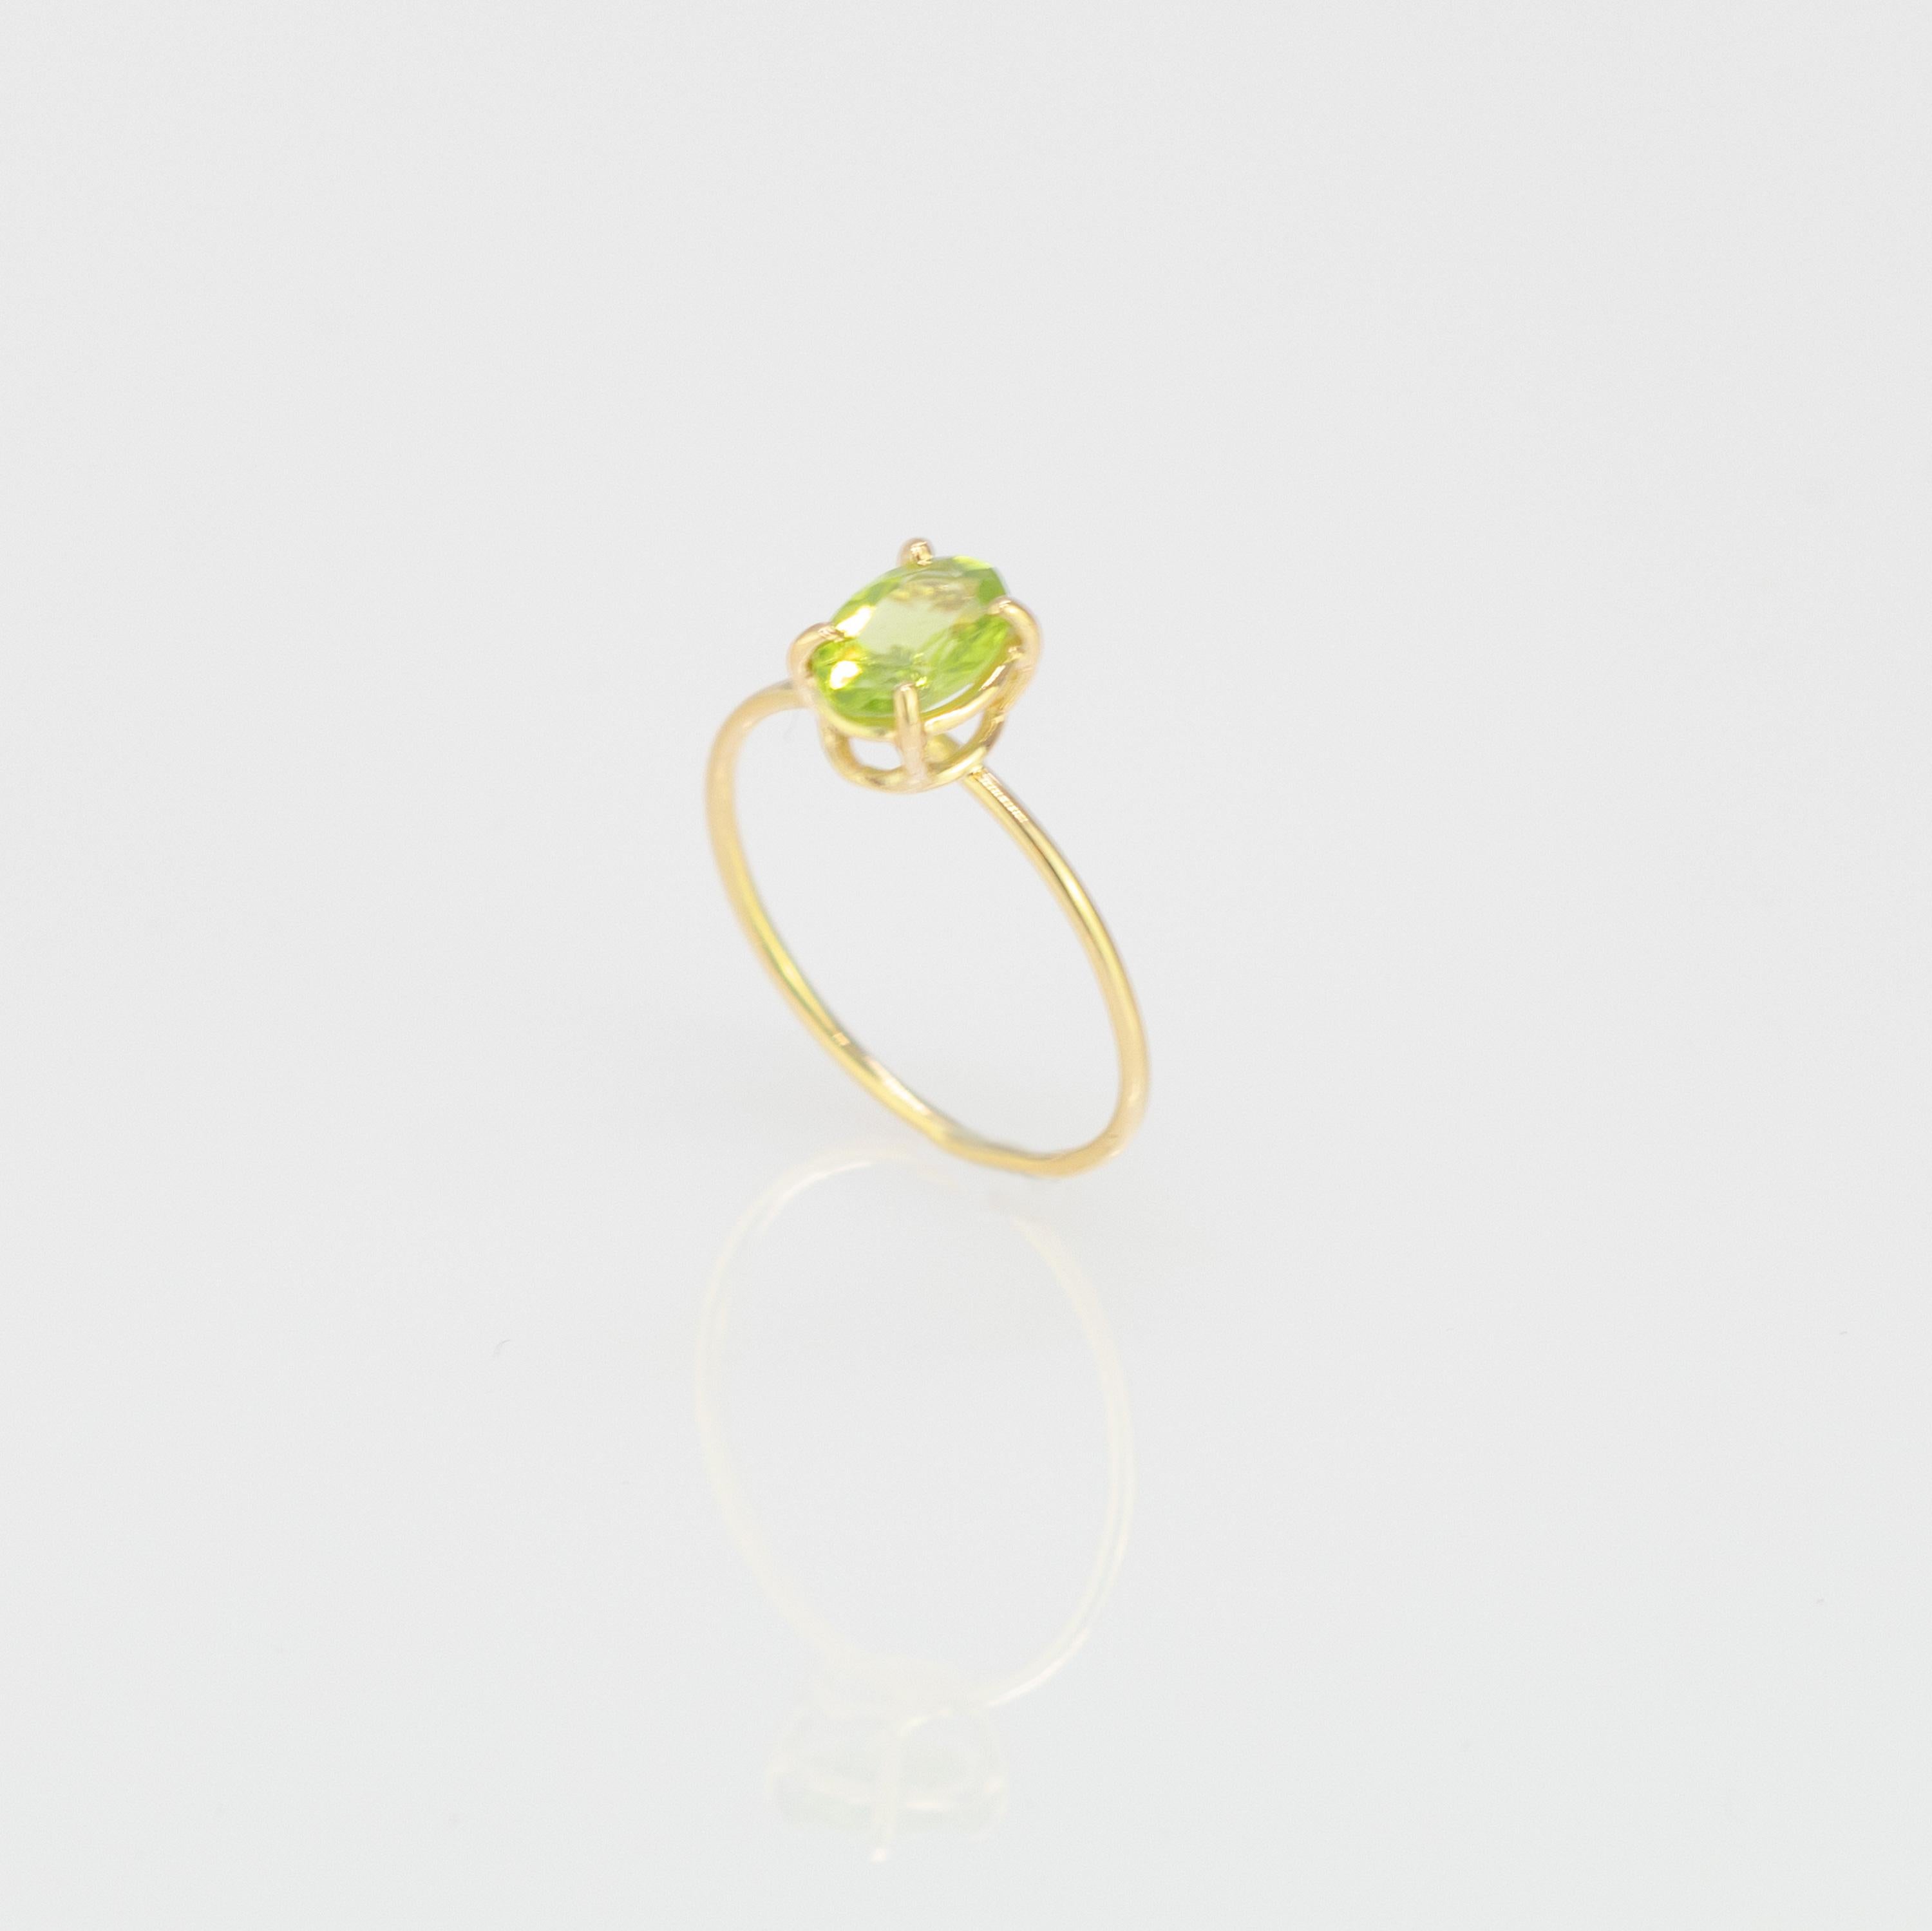 Oval cut solitaire ring design. 0.65 carats shining peridot on 18 karat yellow gold ring inspired by the colours of South Italy's Winter Trees. With a perfect size, it will fill with your daily elegant outfits.

inspired by the imposing French Alps